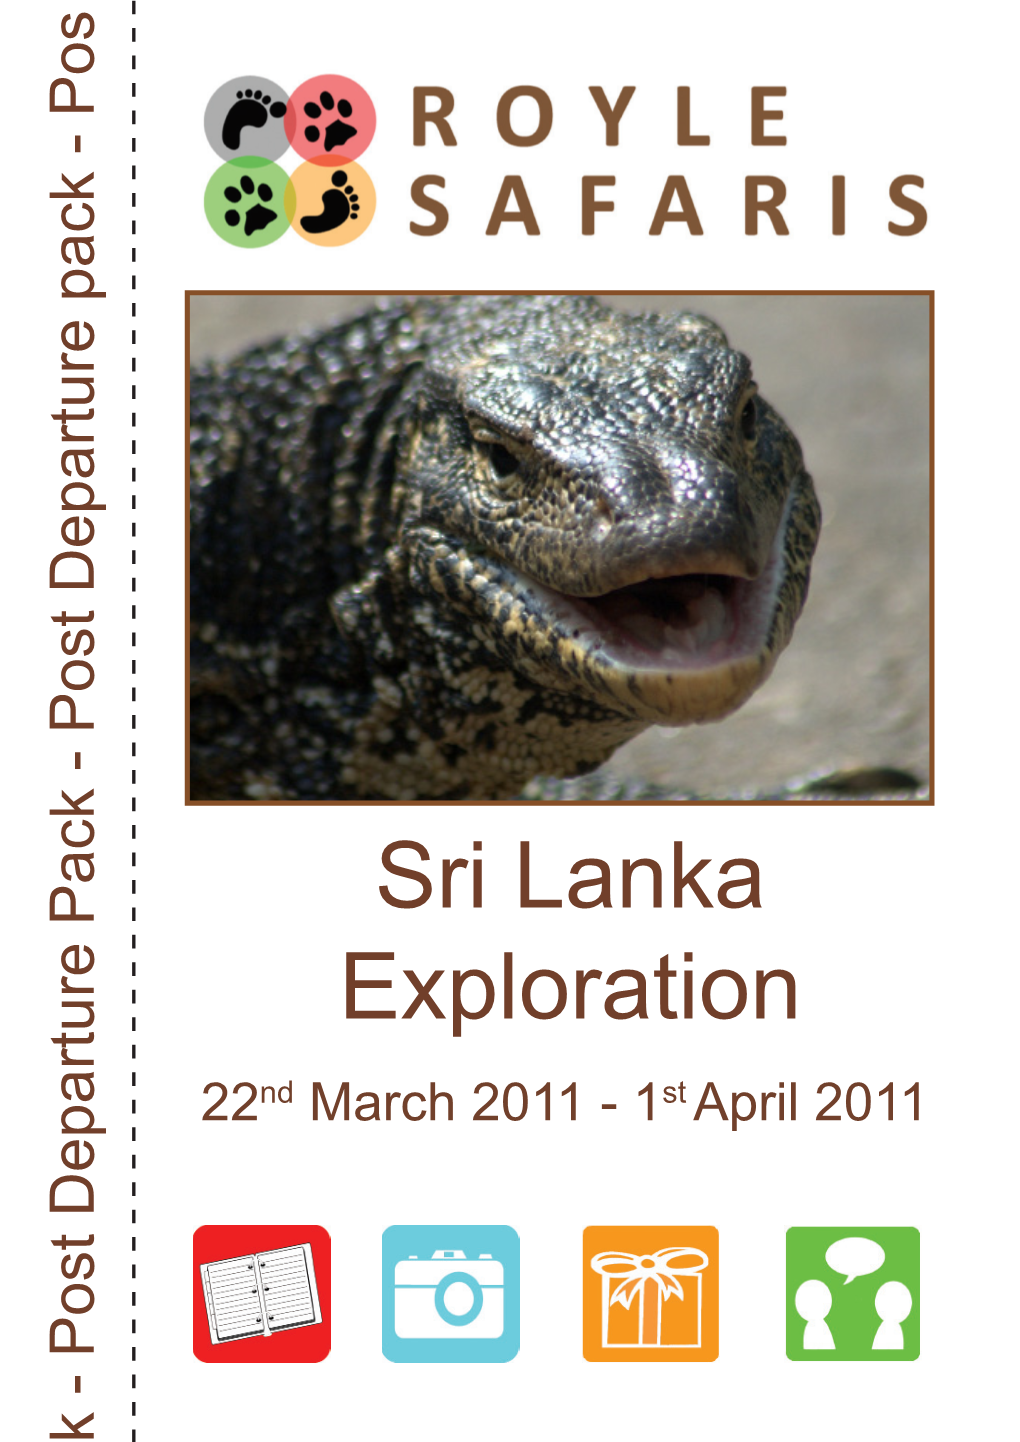 Sri Lanka Exploration Tour to Various Sites Around This Spectacular Country This March